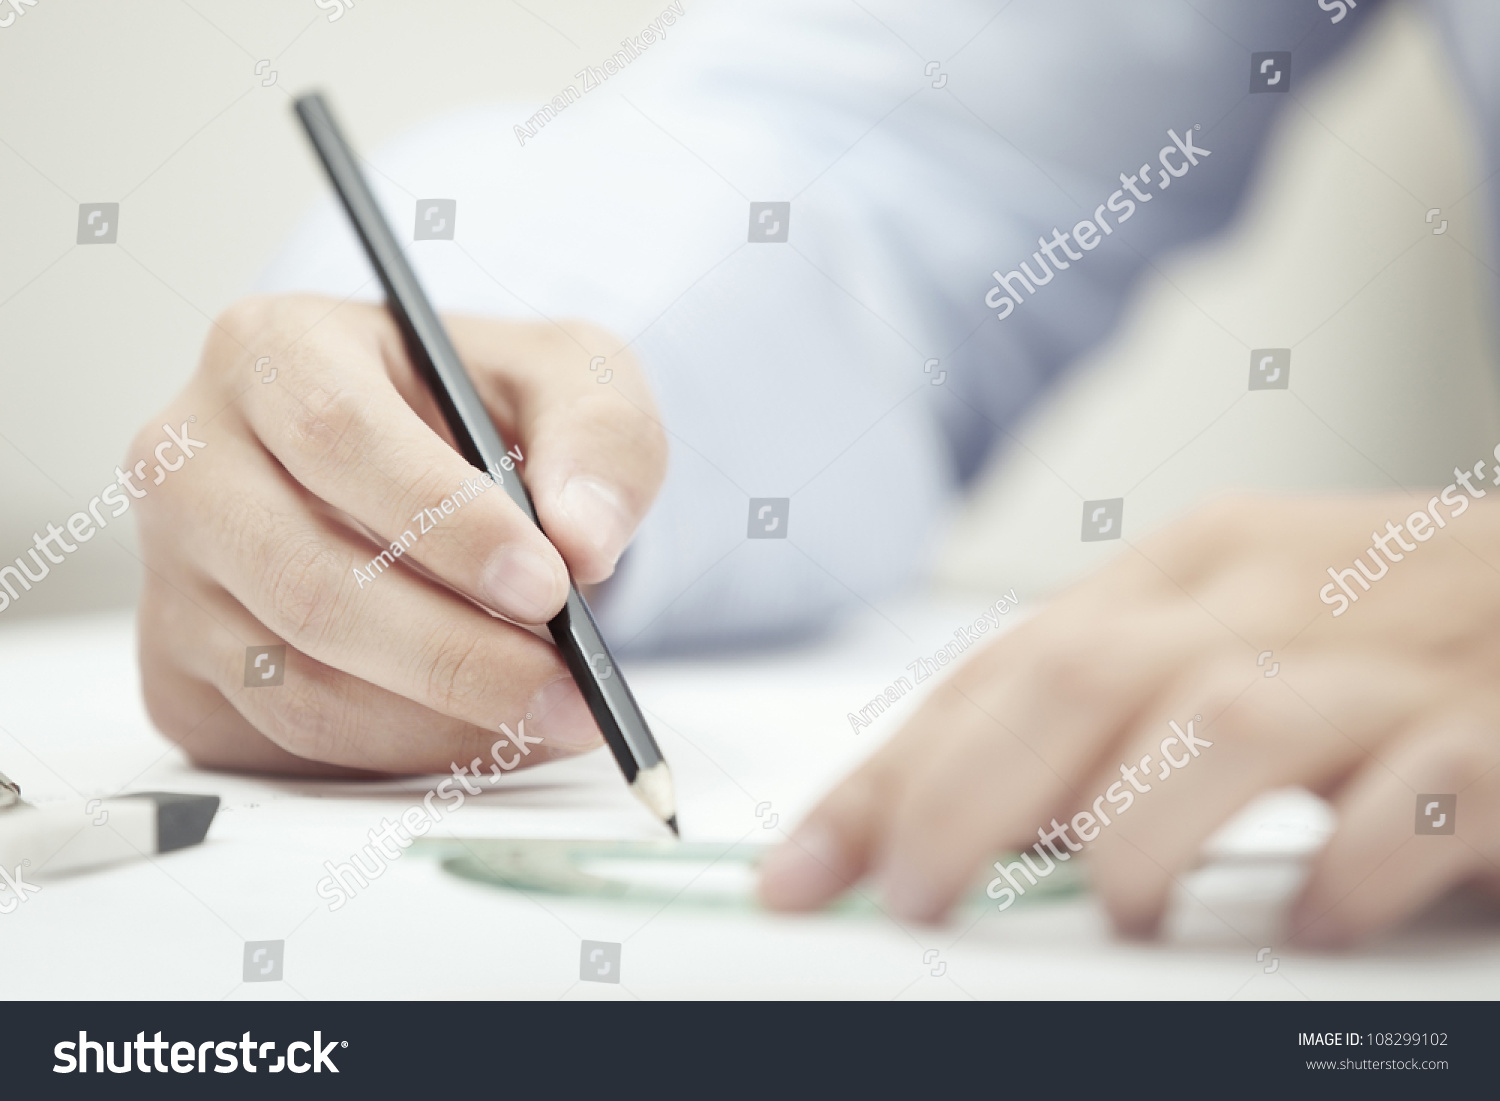 Hands Of Engineer Drawing By Pencil Stock Photo 108299102